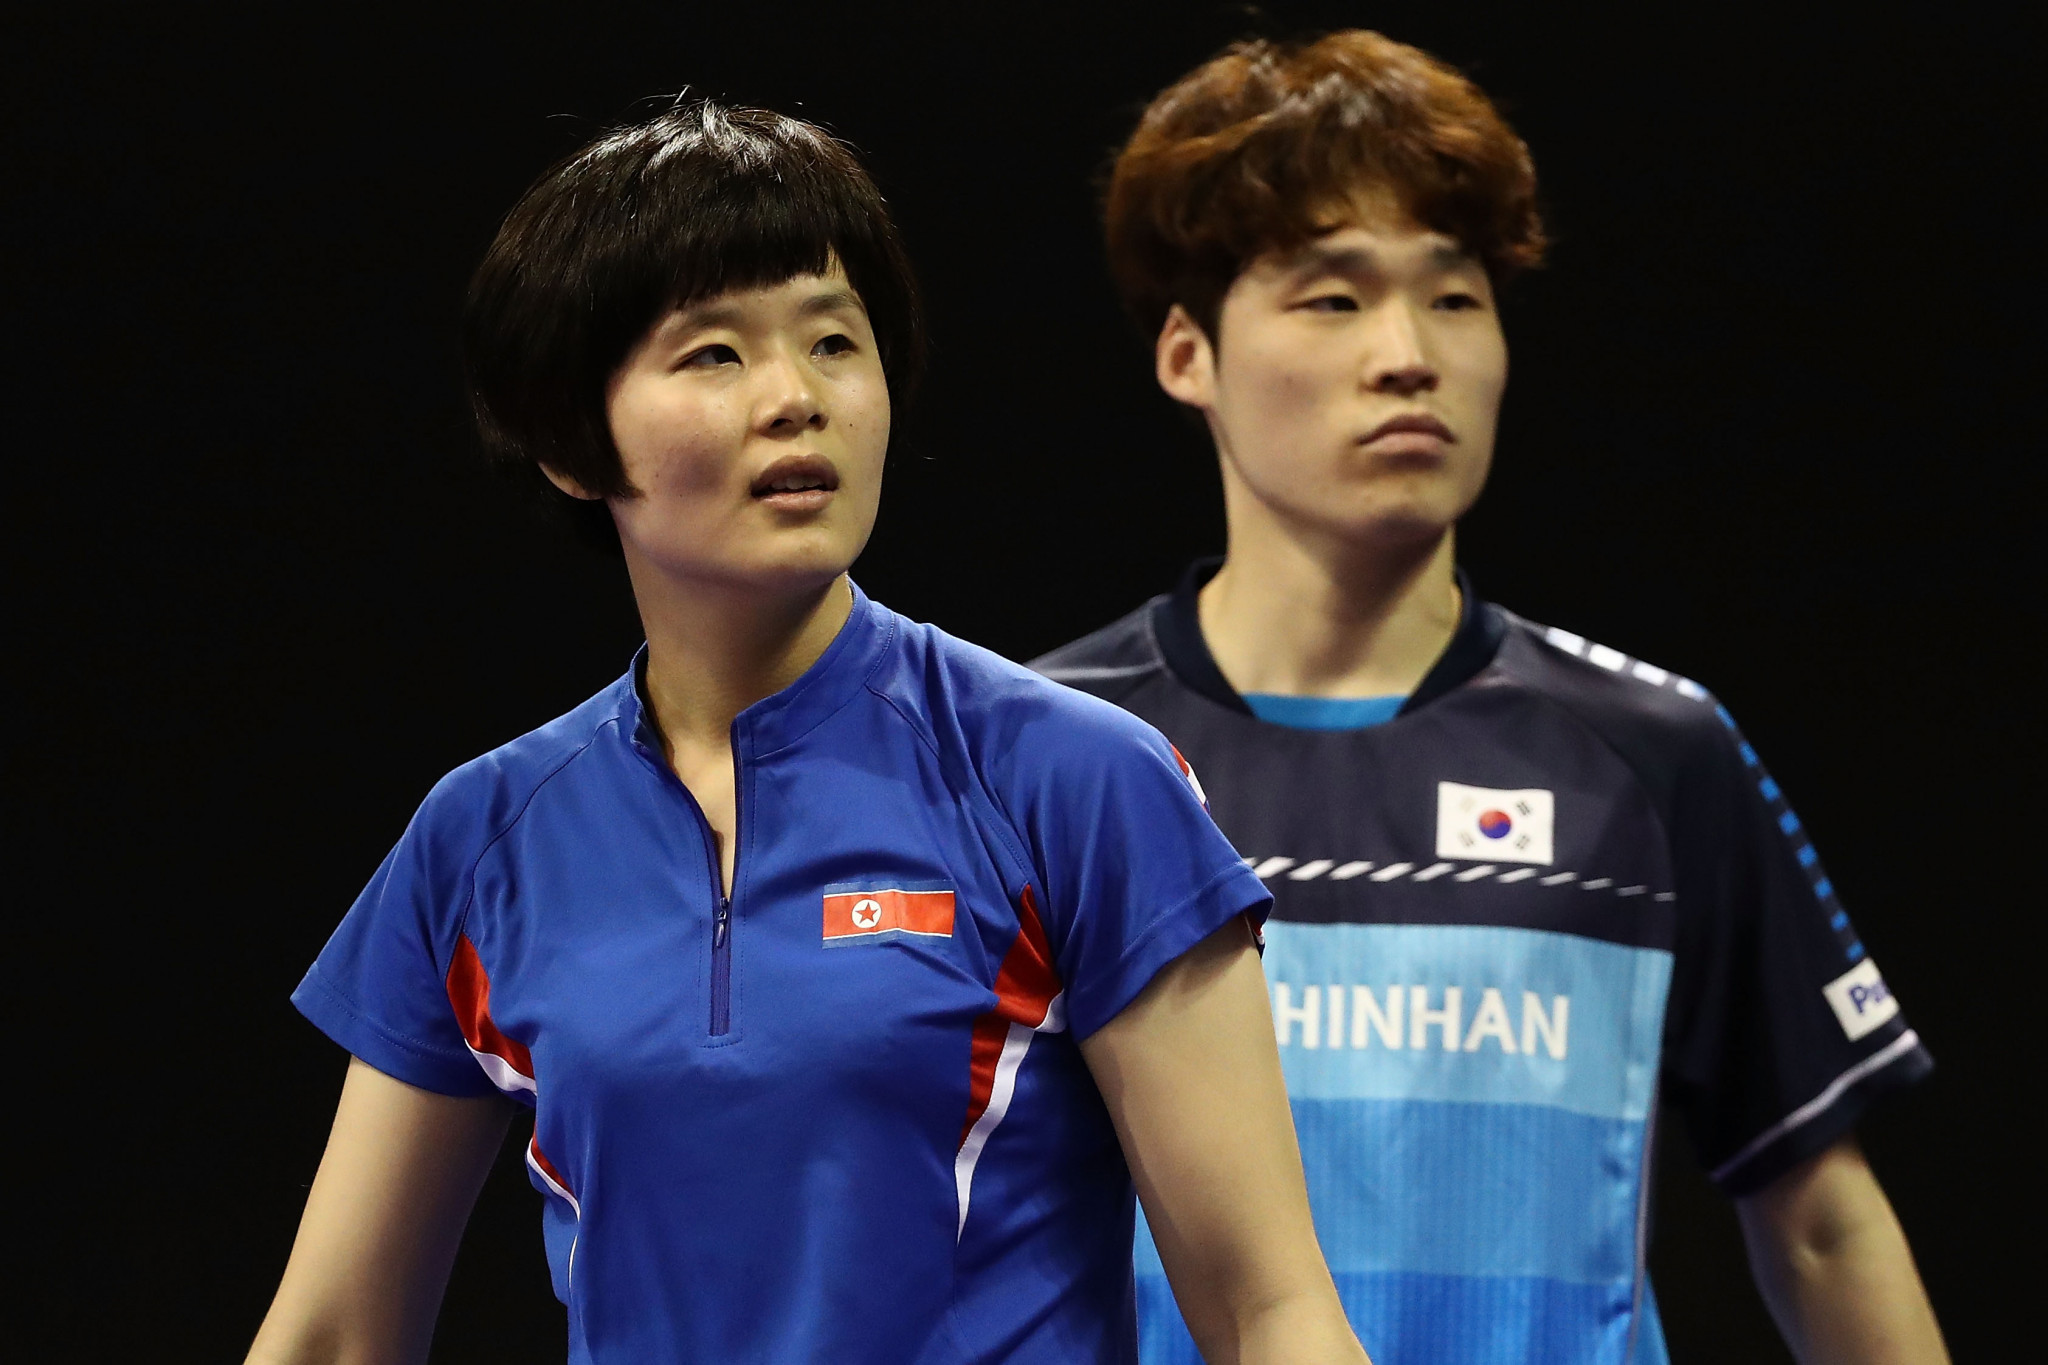 Jang Woojin and Cha Hyo Sim in the mixed doubles were one of the two unified pairs to win today ©Getty Images